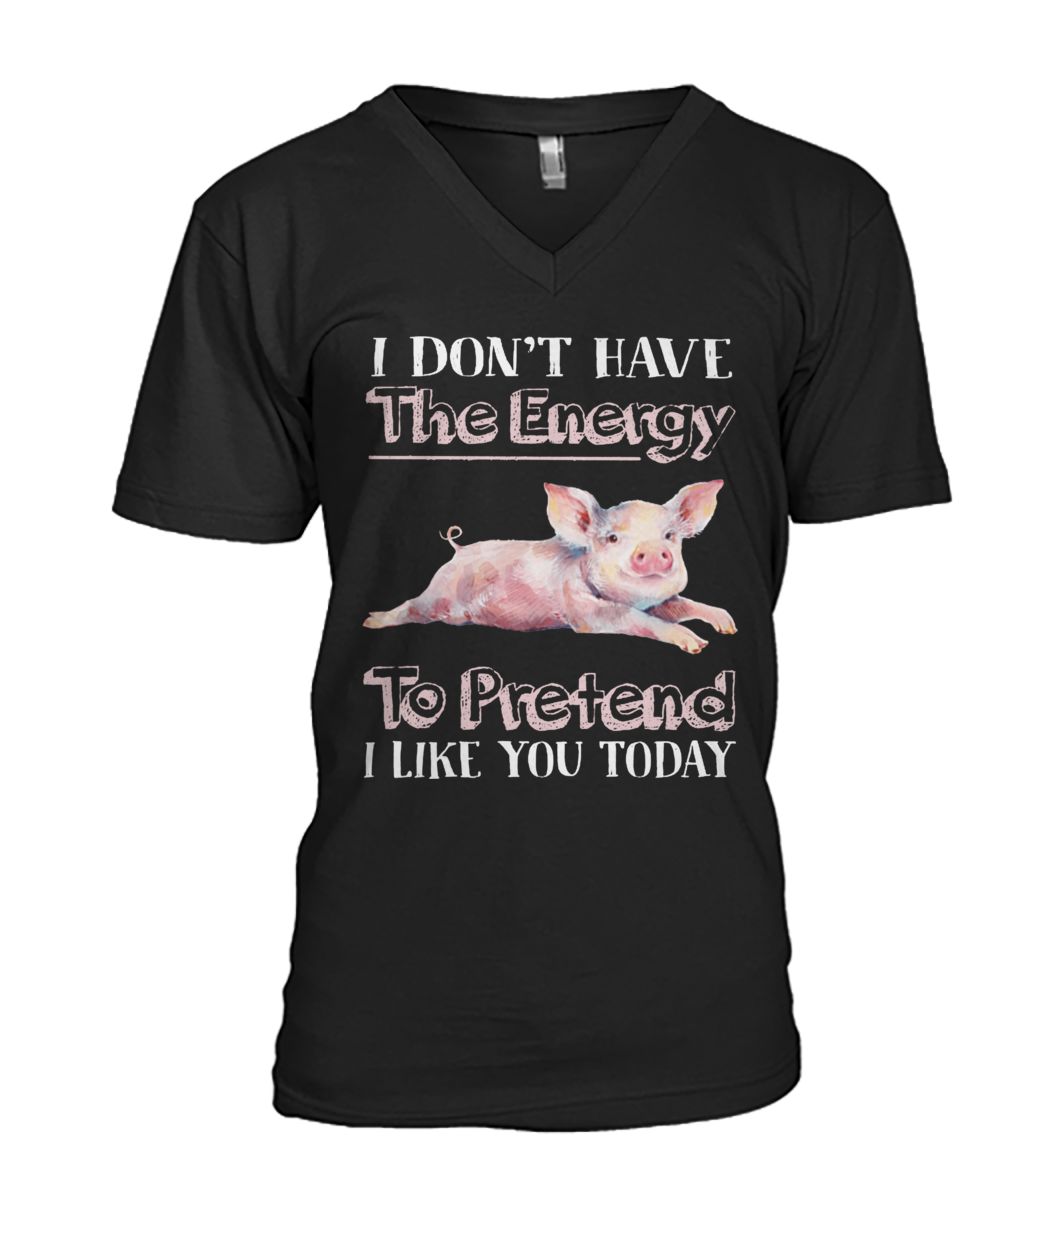 I don't have the energy to pretend I like you today pig mens v-neck